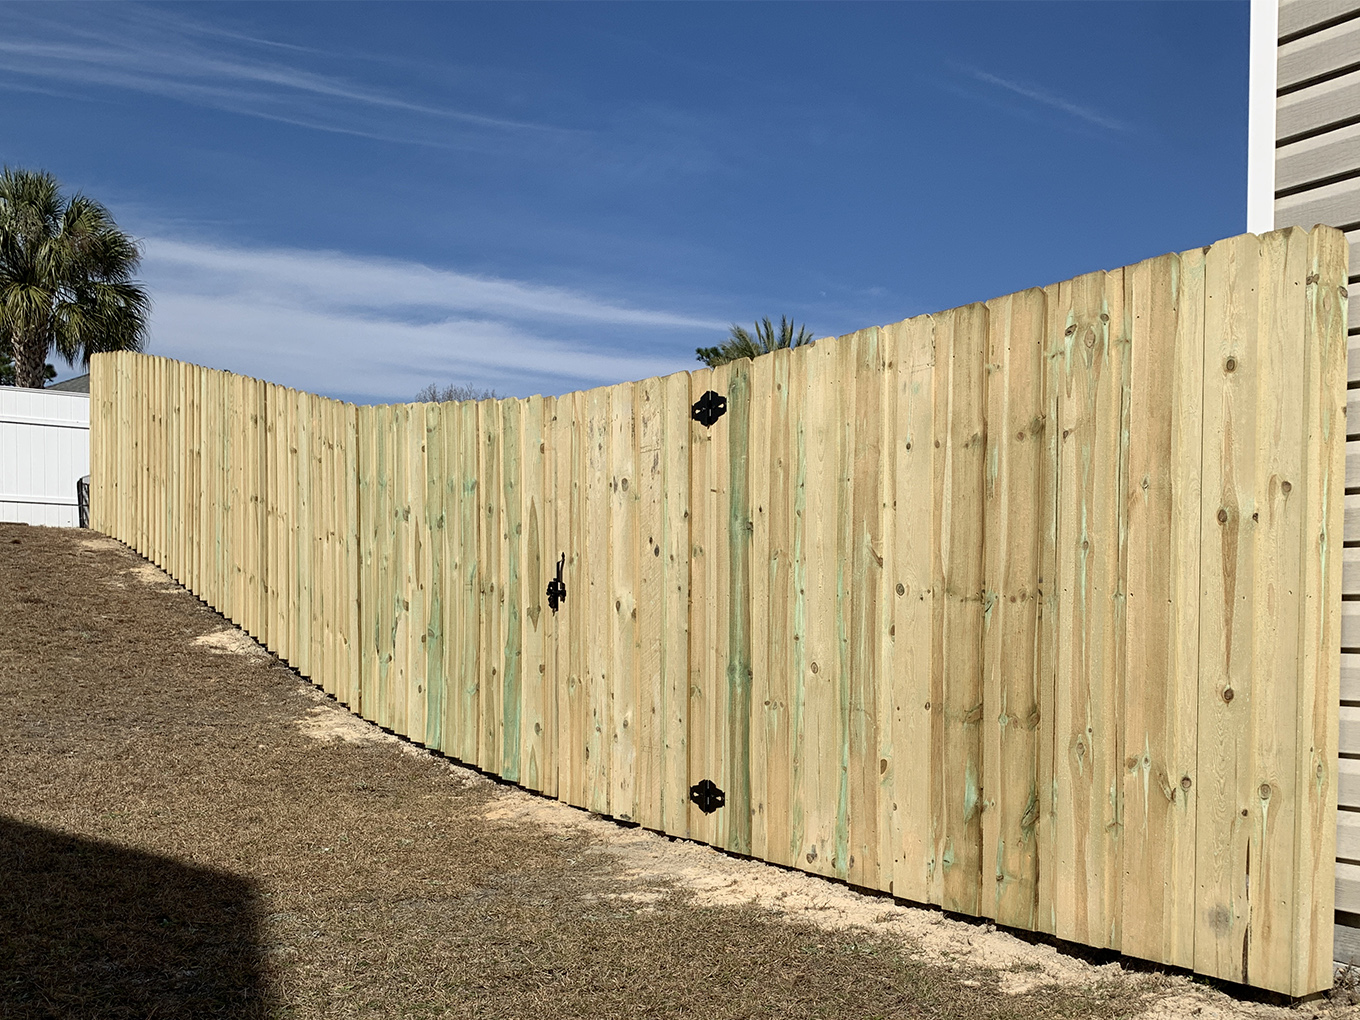 Photo of a wood privacy fence and gate